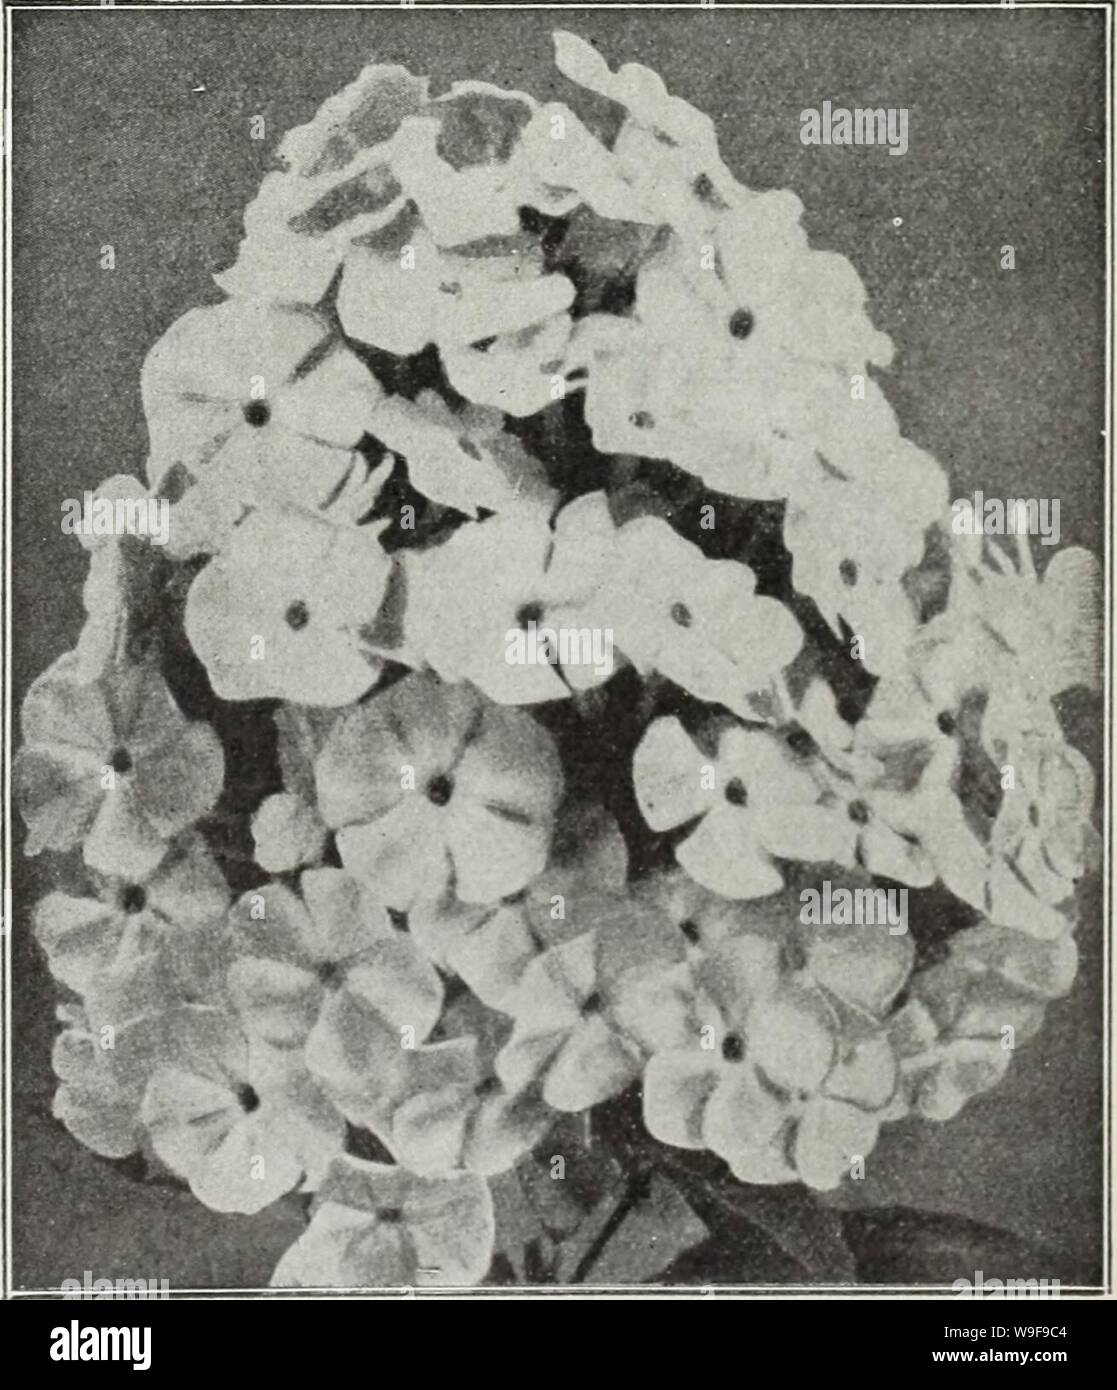 Archive image from page 24 of Currie's autumn 1929 54th year. Currie's autumn 1929 54th year bulbs and plants  curriesautumn19219curr Year: 1929 ( MONARDA (Bergamot) Showy hardy plants with aromatic foliage, from 2 to 3 feet high, bearing bright flowers during July and August. Didyma, Cambridge Scarlet (Oswego Tea)—Brilliant crimson-scarlet. Rosea (Bee Balm)—Deep rose colored. Violacea—Bright amaranth red. Price, each, 25c; per dozen, 2.50. MYOSOTIS (Forget-me-not) Palustris Semperflorens—Azure blue, blooming continuously throughout the season; fine for shady nooks. Price, each, 25c; per dozen Stock Photo